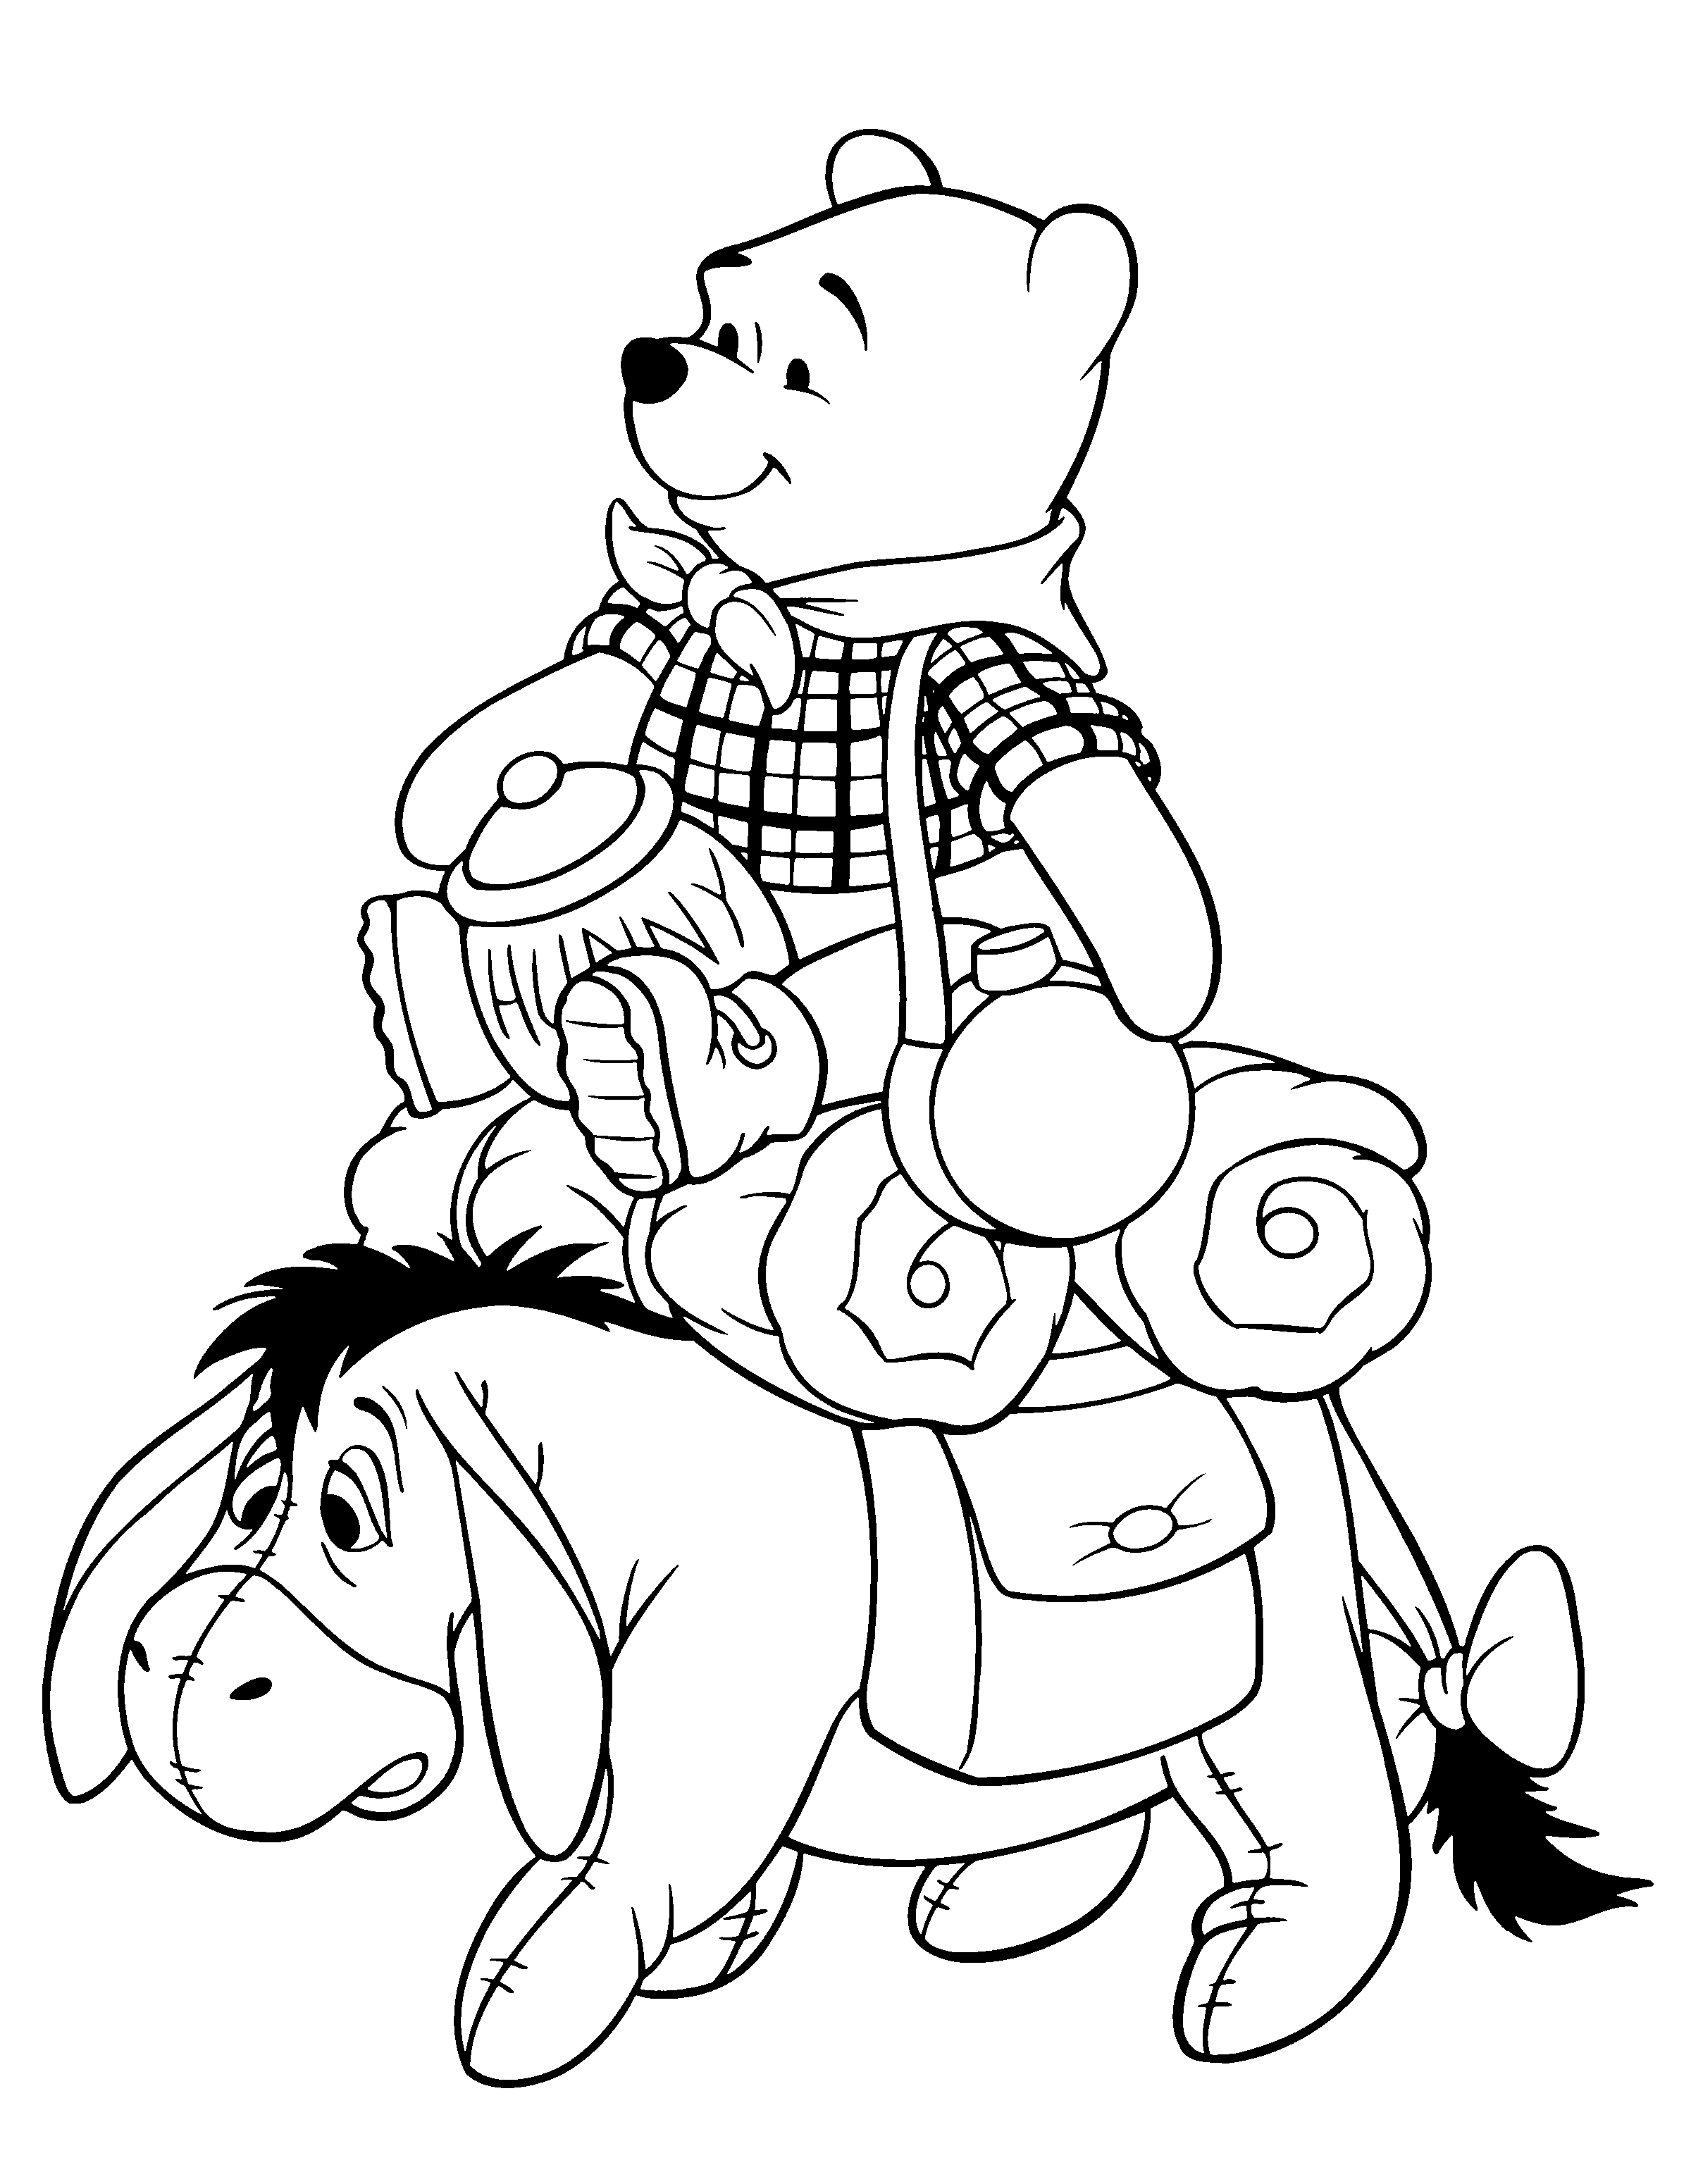 animated-coloring-pages-winnie-the-pooh-image-0045